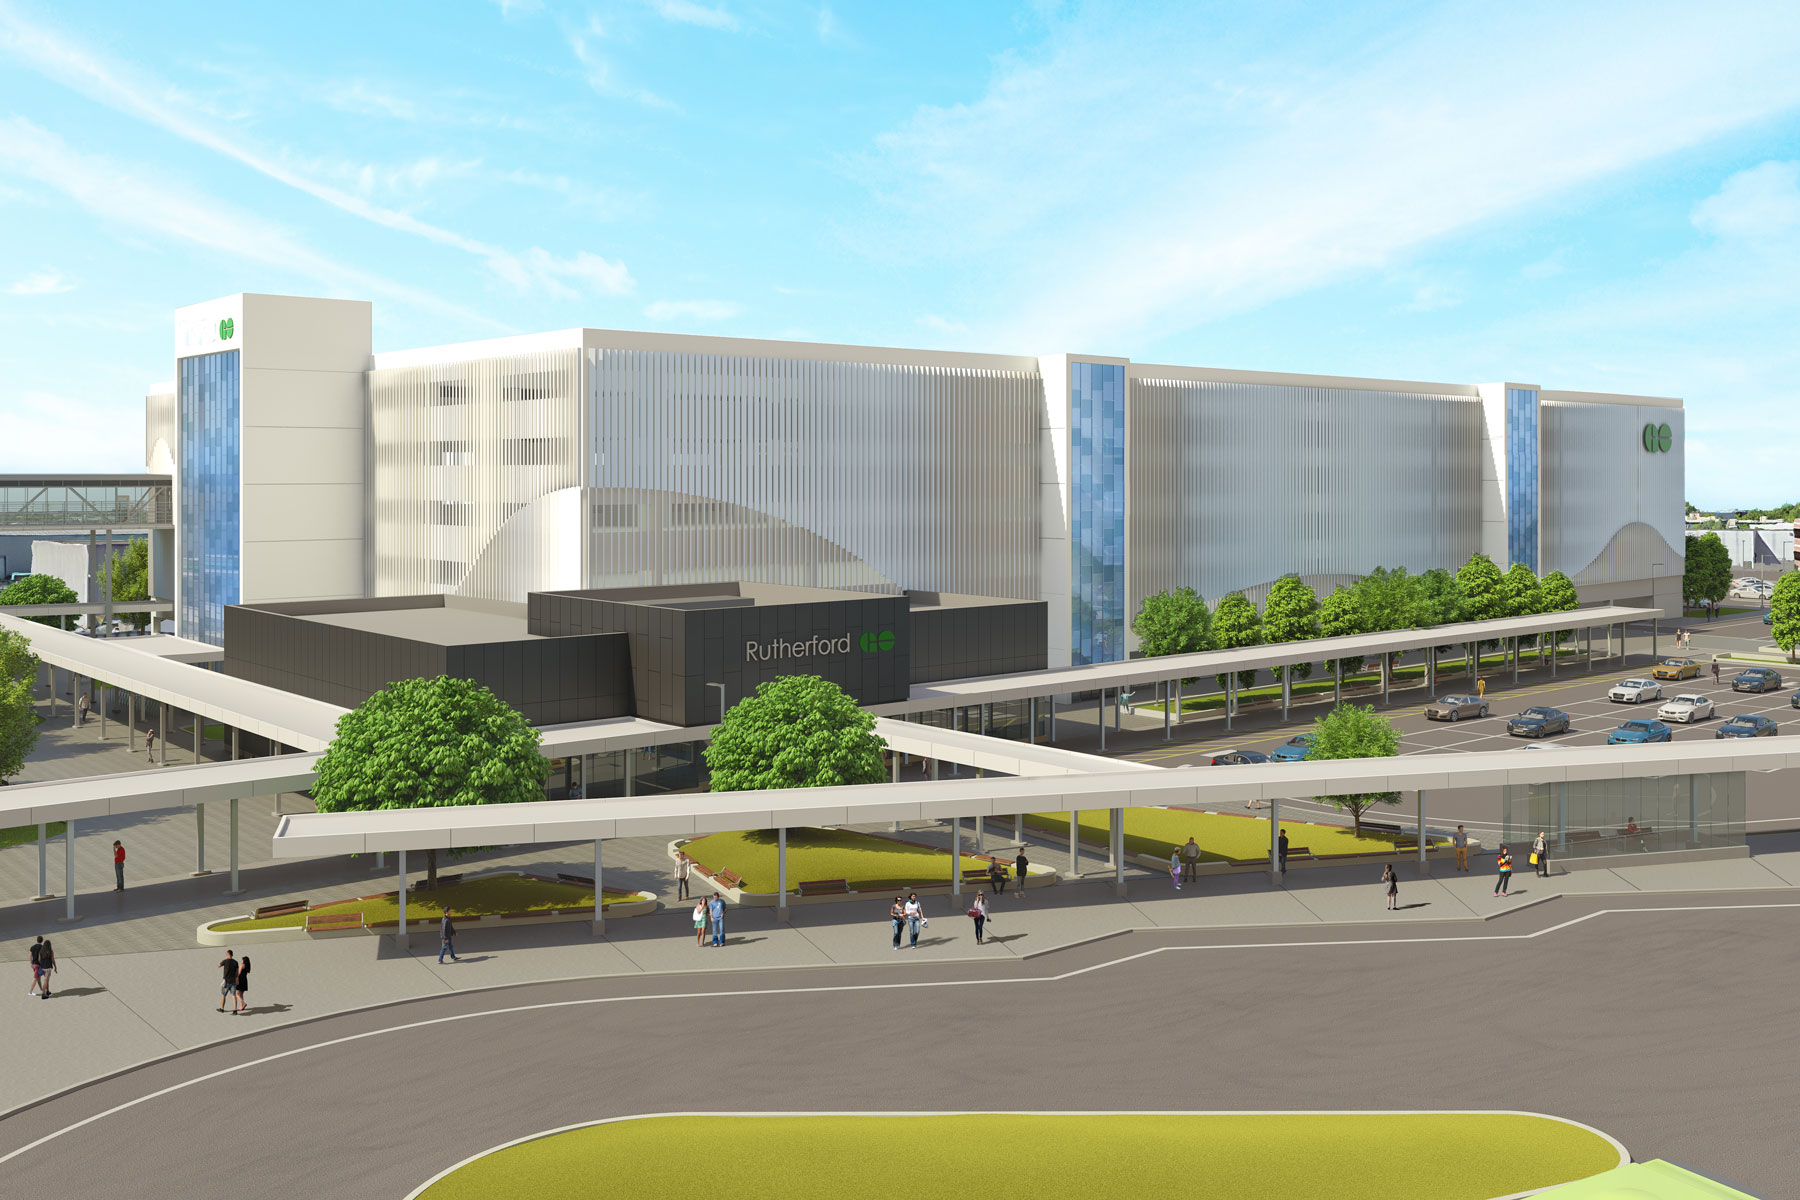 Exterior rendering of the facility showing the parking structure and bus terminal